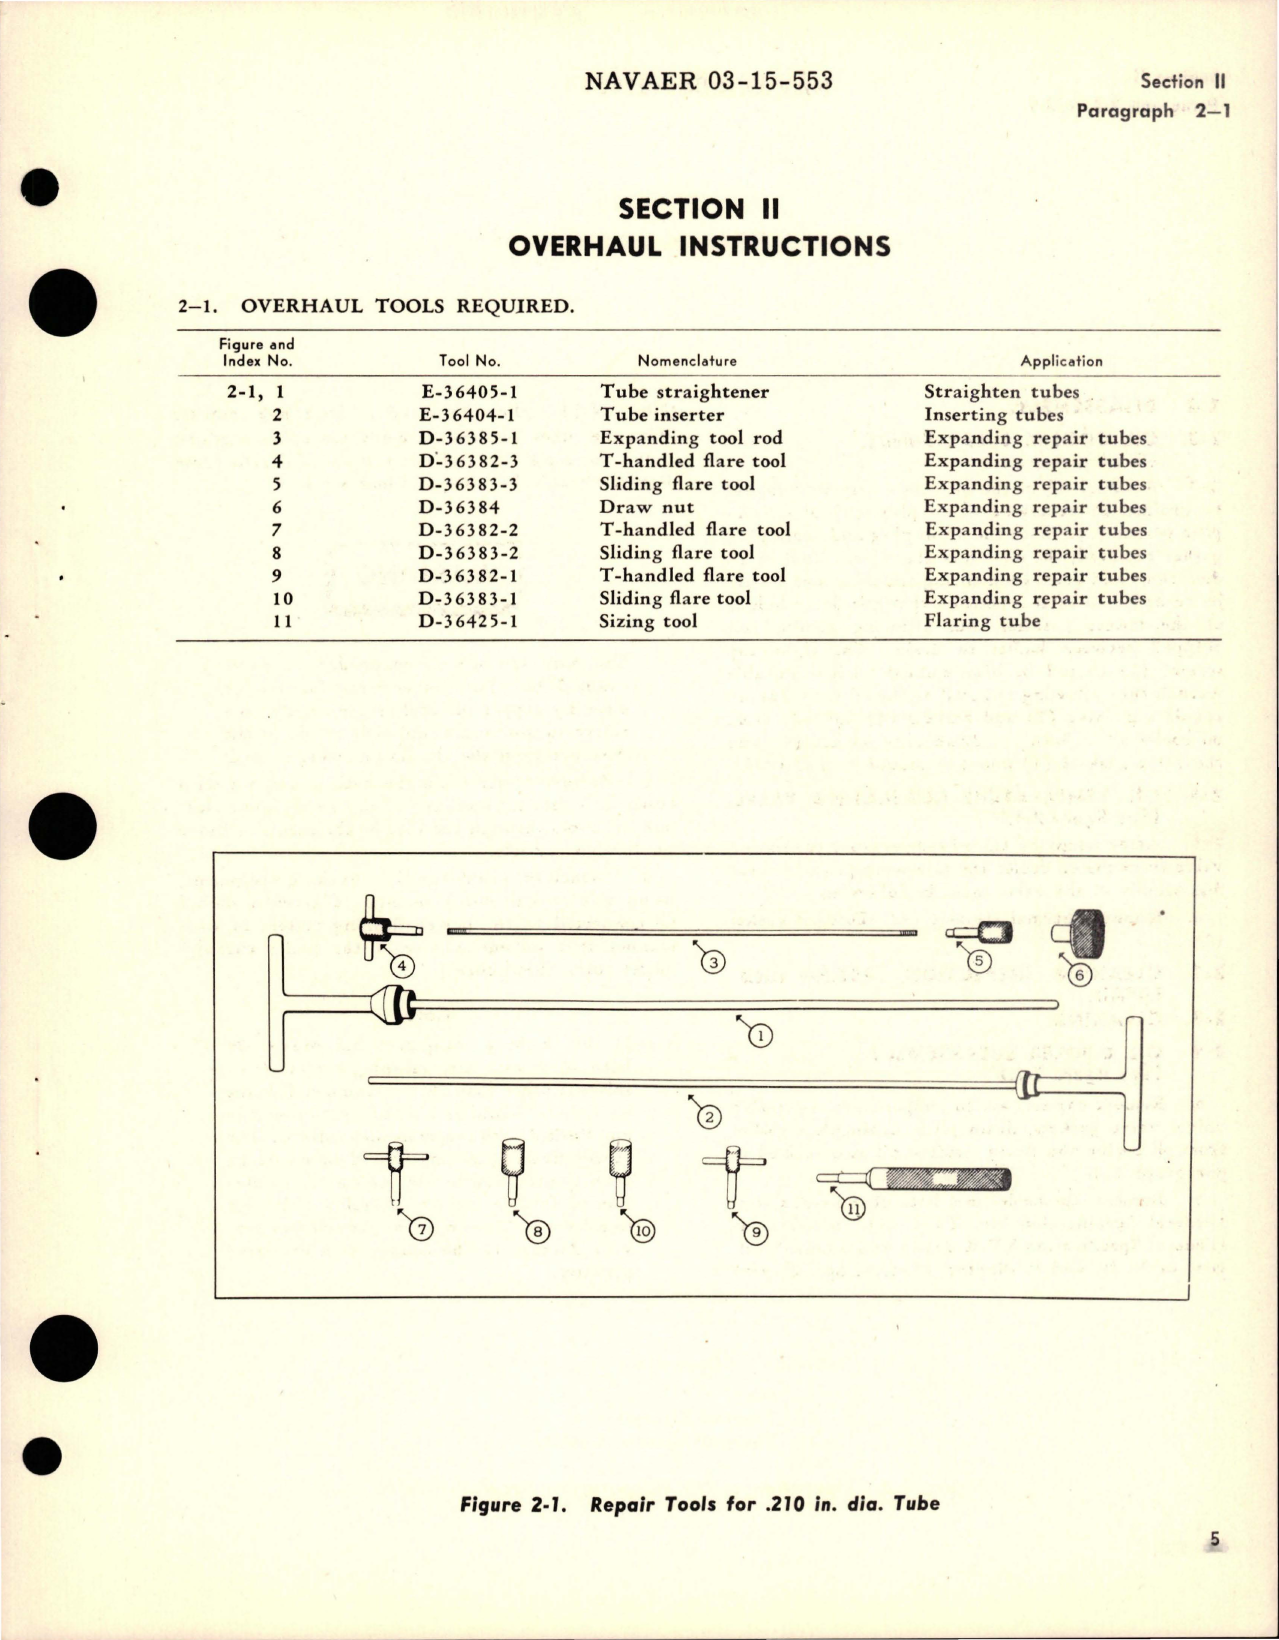 Sample page 7 from AirCorps Library document: Operation, Service and Overhaul Instructions with Parts for Oil Cooler Assembly - Model E-36778